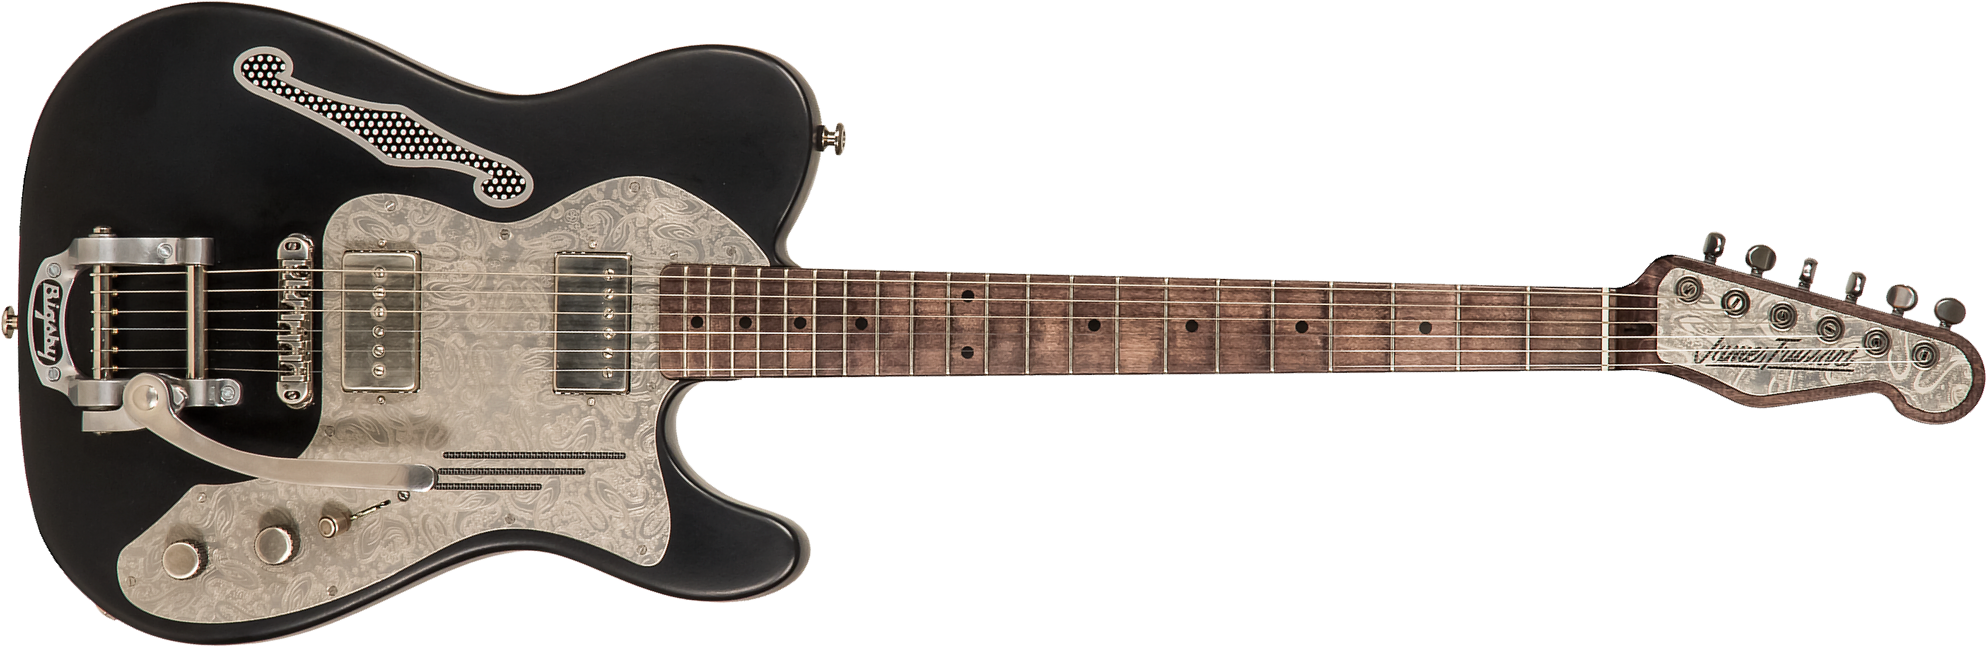 James Trussart Deluxe Steelcaster Perf.back P90h Bigsby Mn #21132 - Antique Silver Paisley Engraved Satin Black - Guitare Électrique Forme Tel - Main 